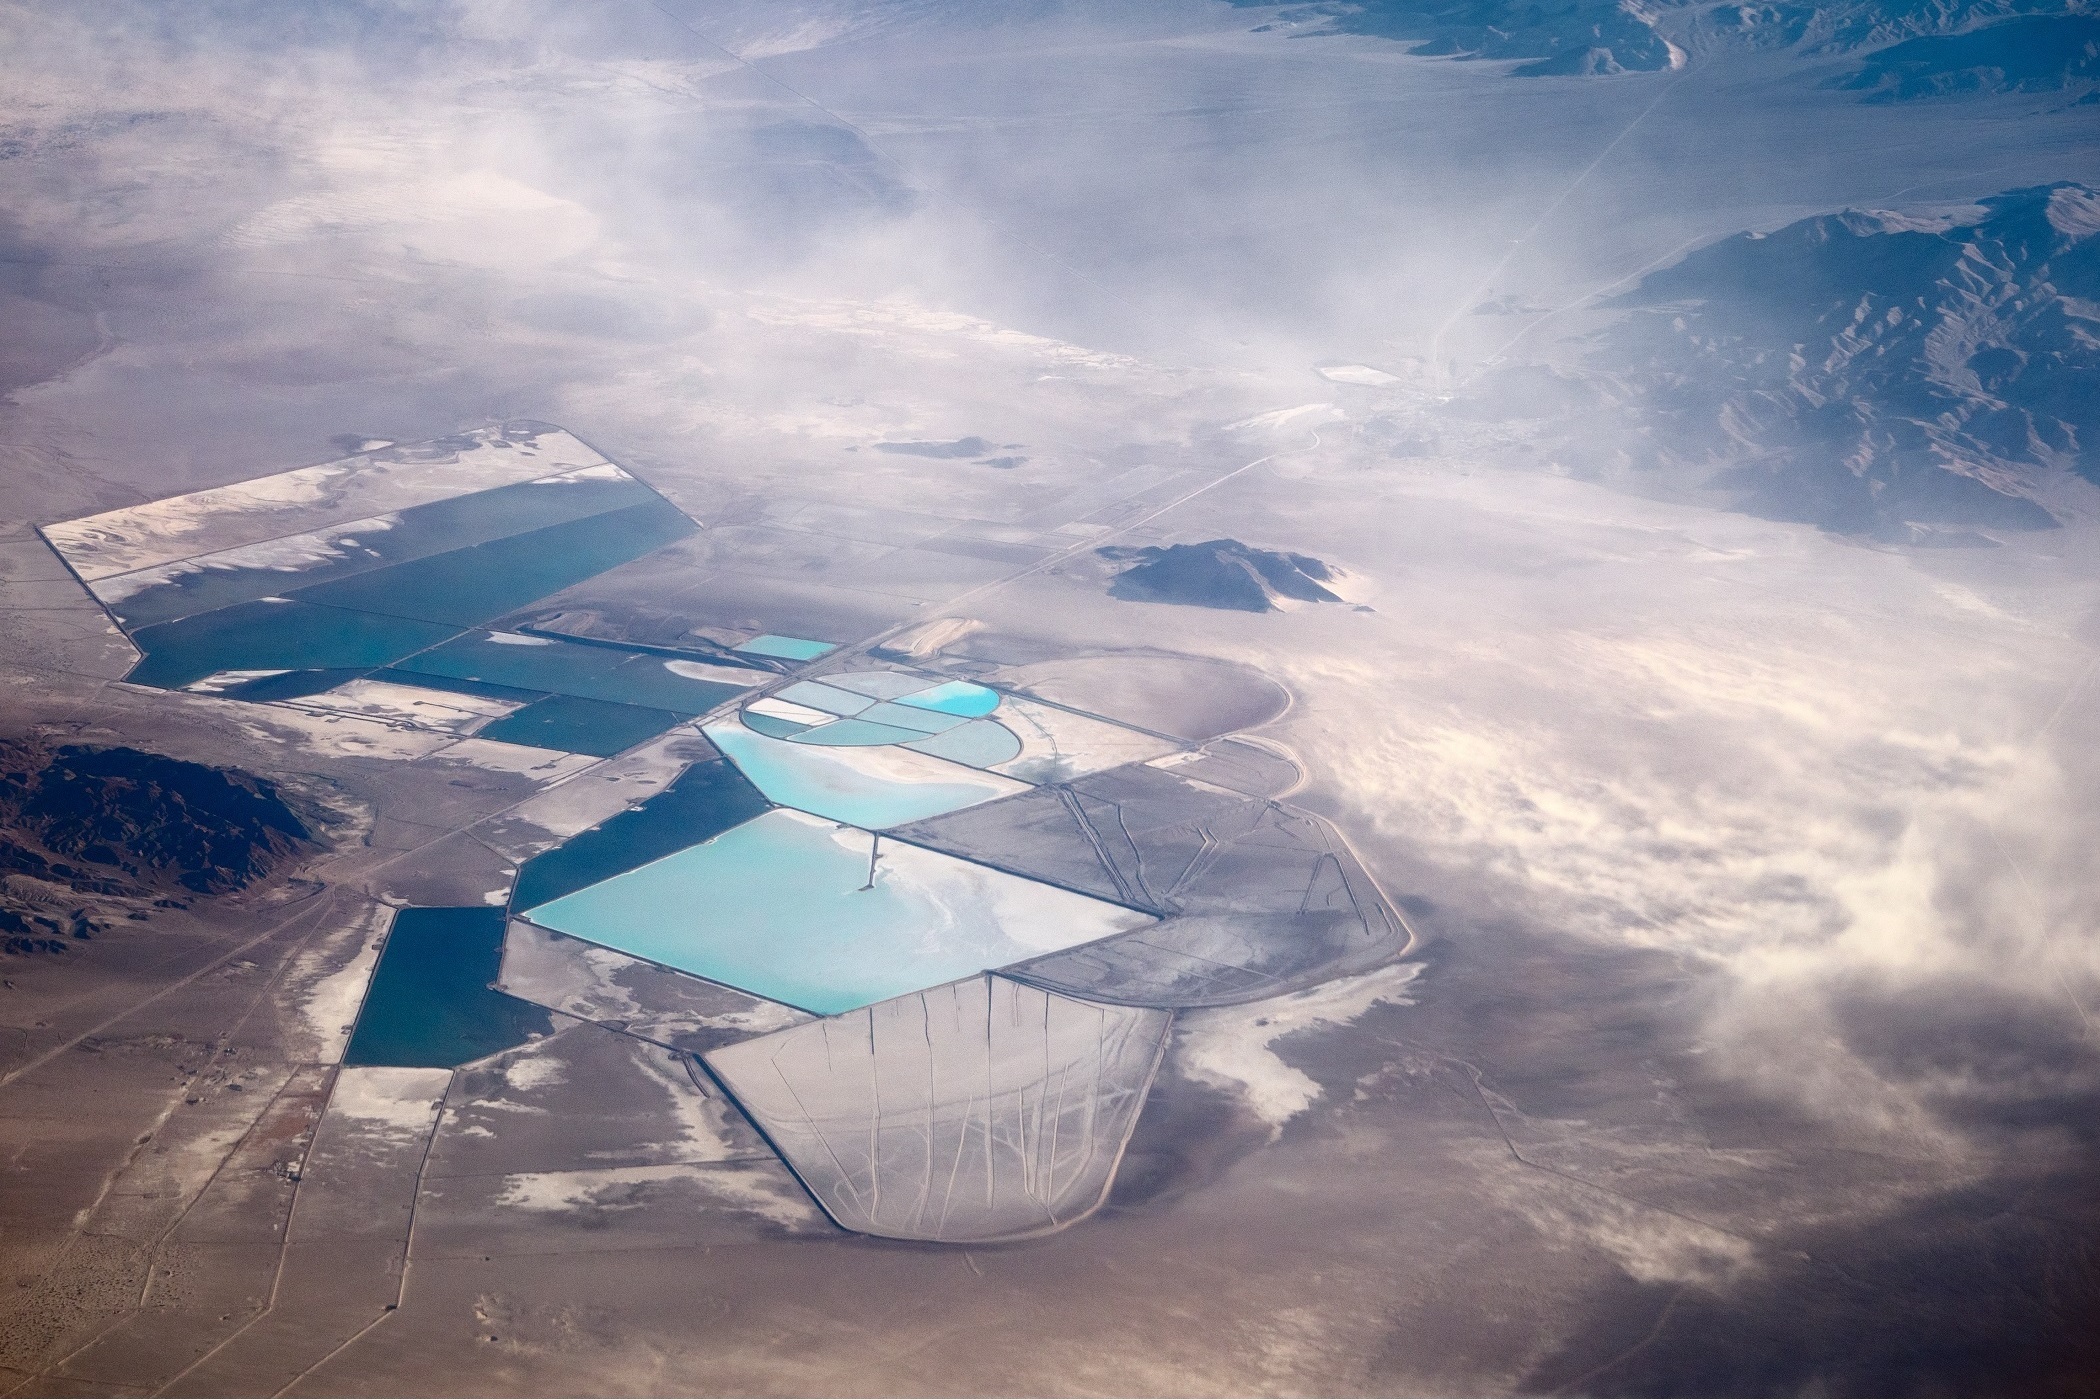 Albemarle Corp., which mines lithium at these evaporation ponds in Silver Lake, Nevada, said it will build a $1.3 billion plant near Columbia, South Carolina, to process lithium hydroxide. (Getty Images)